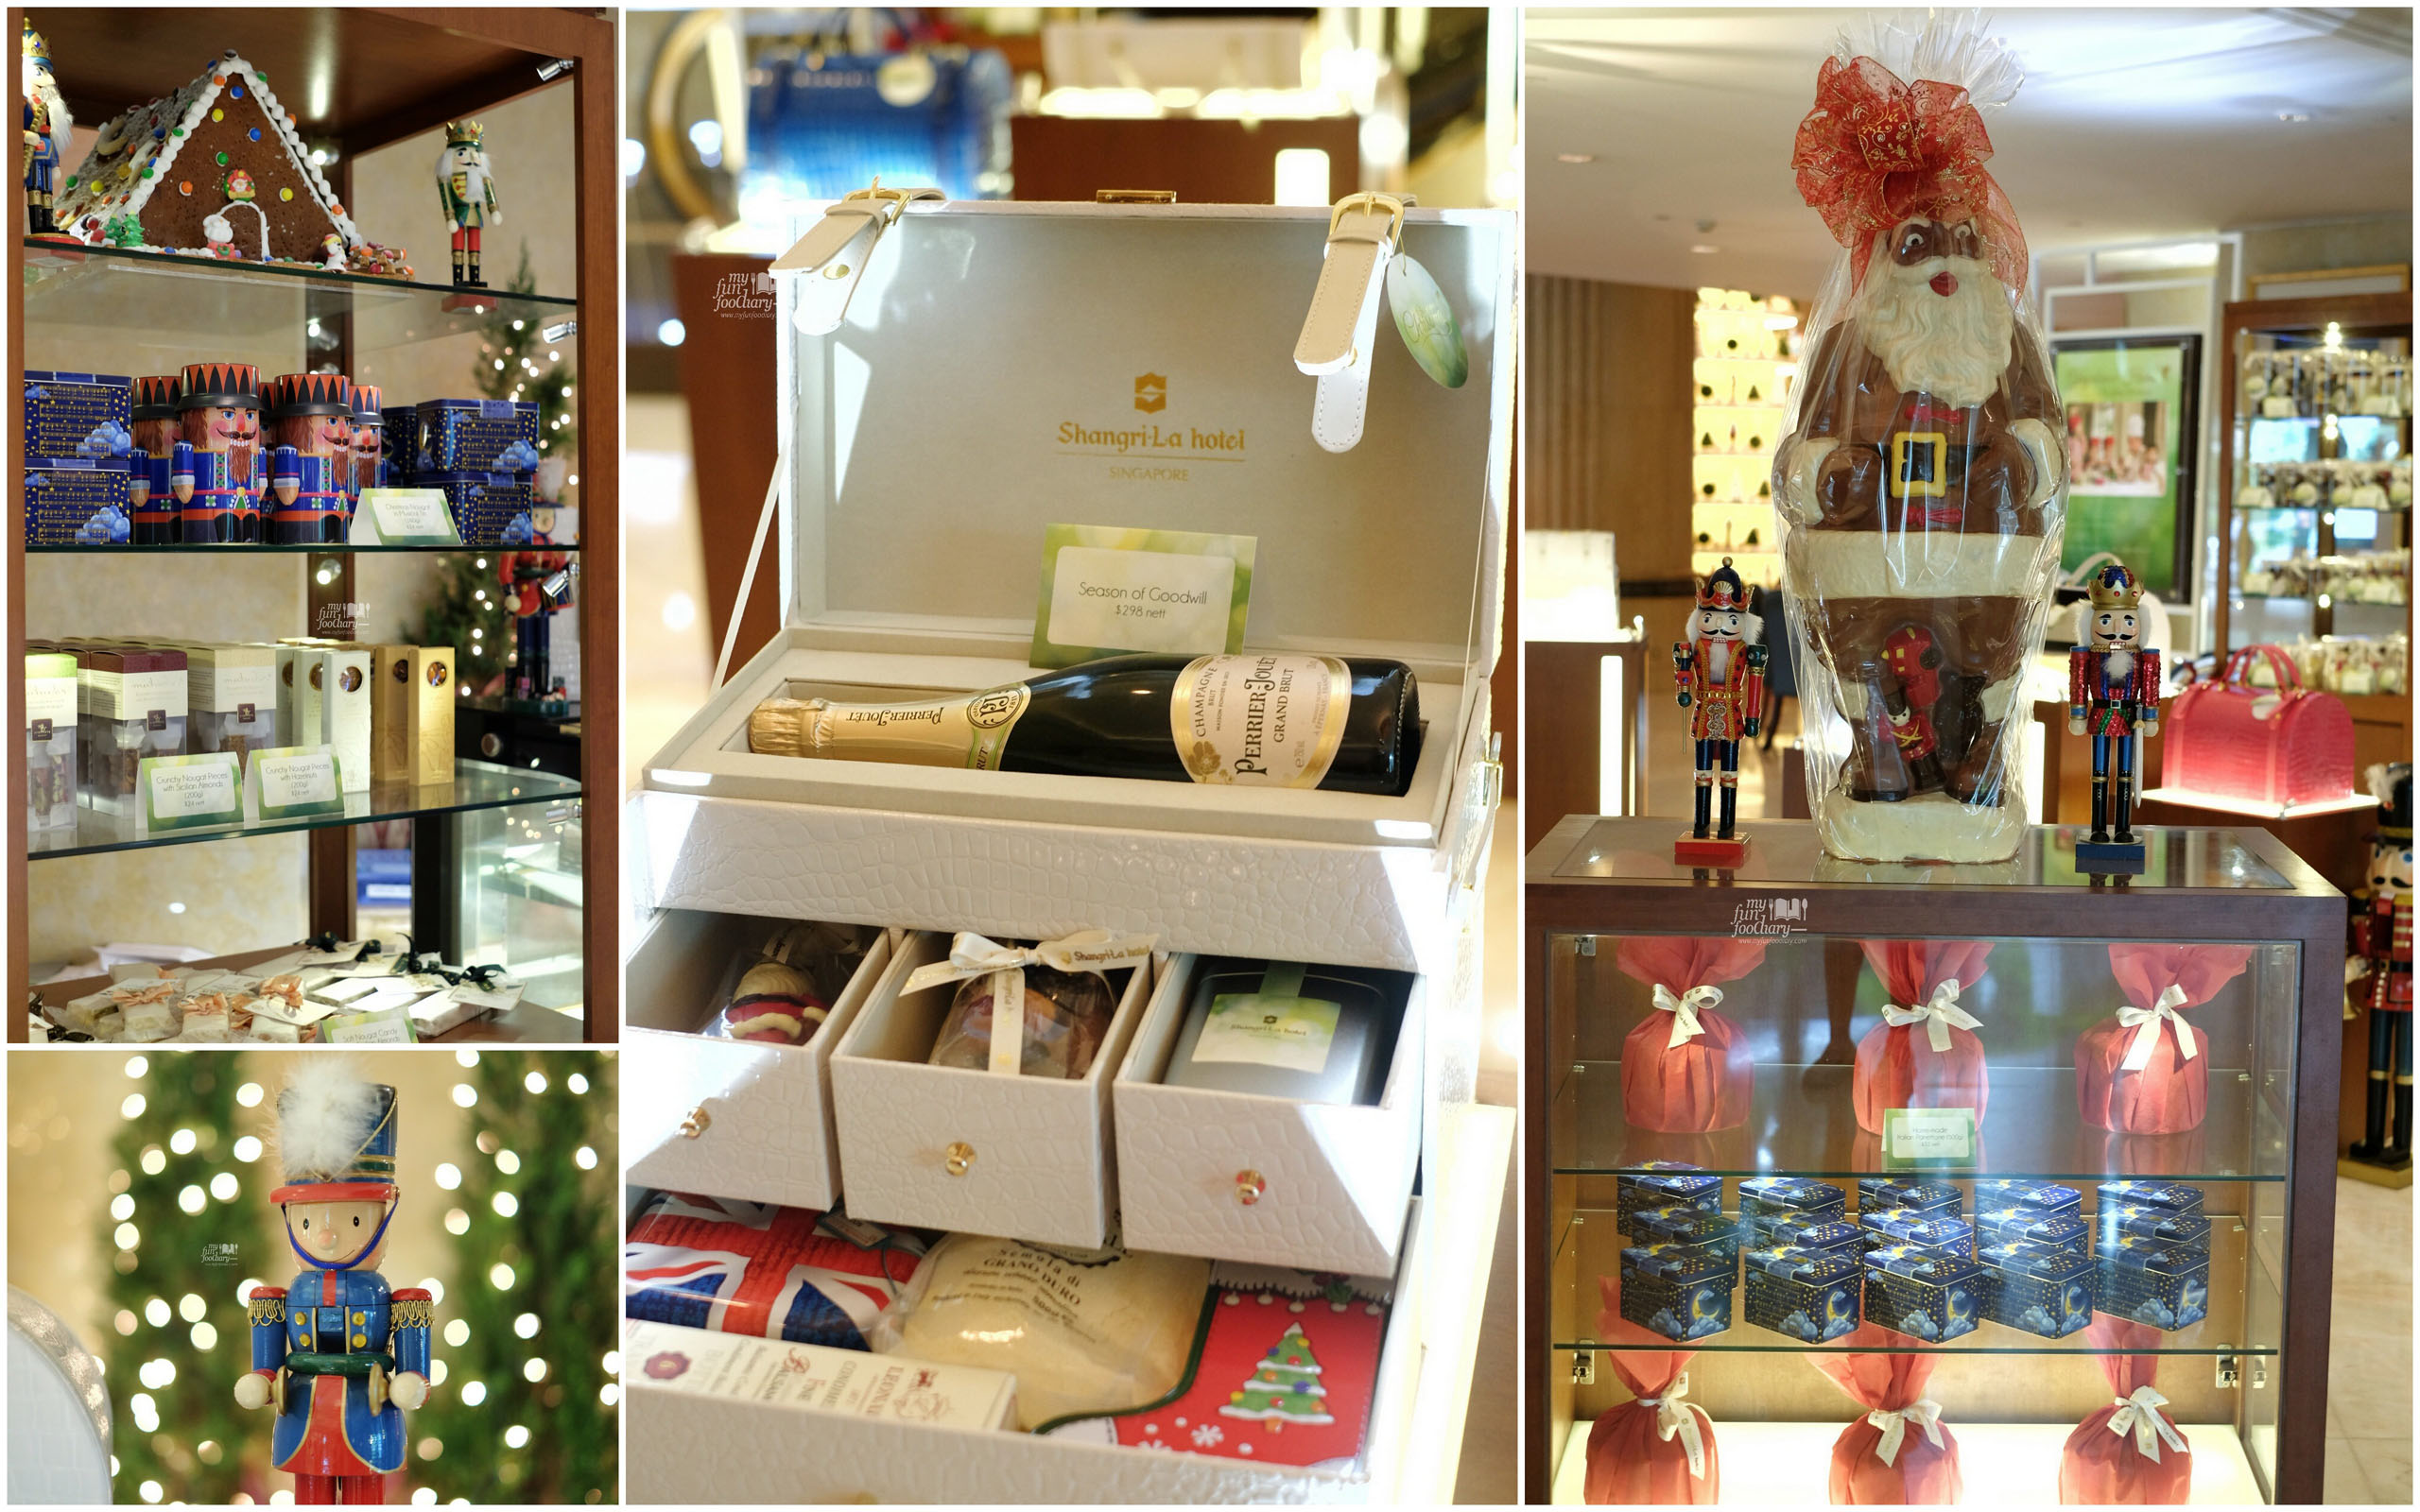 Christmas Hampers and Cookies at Deli Shop Shangri-La Singapore by Myfunfoodiary